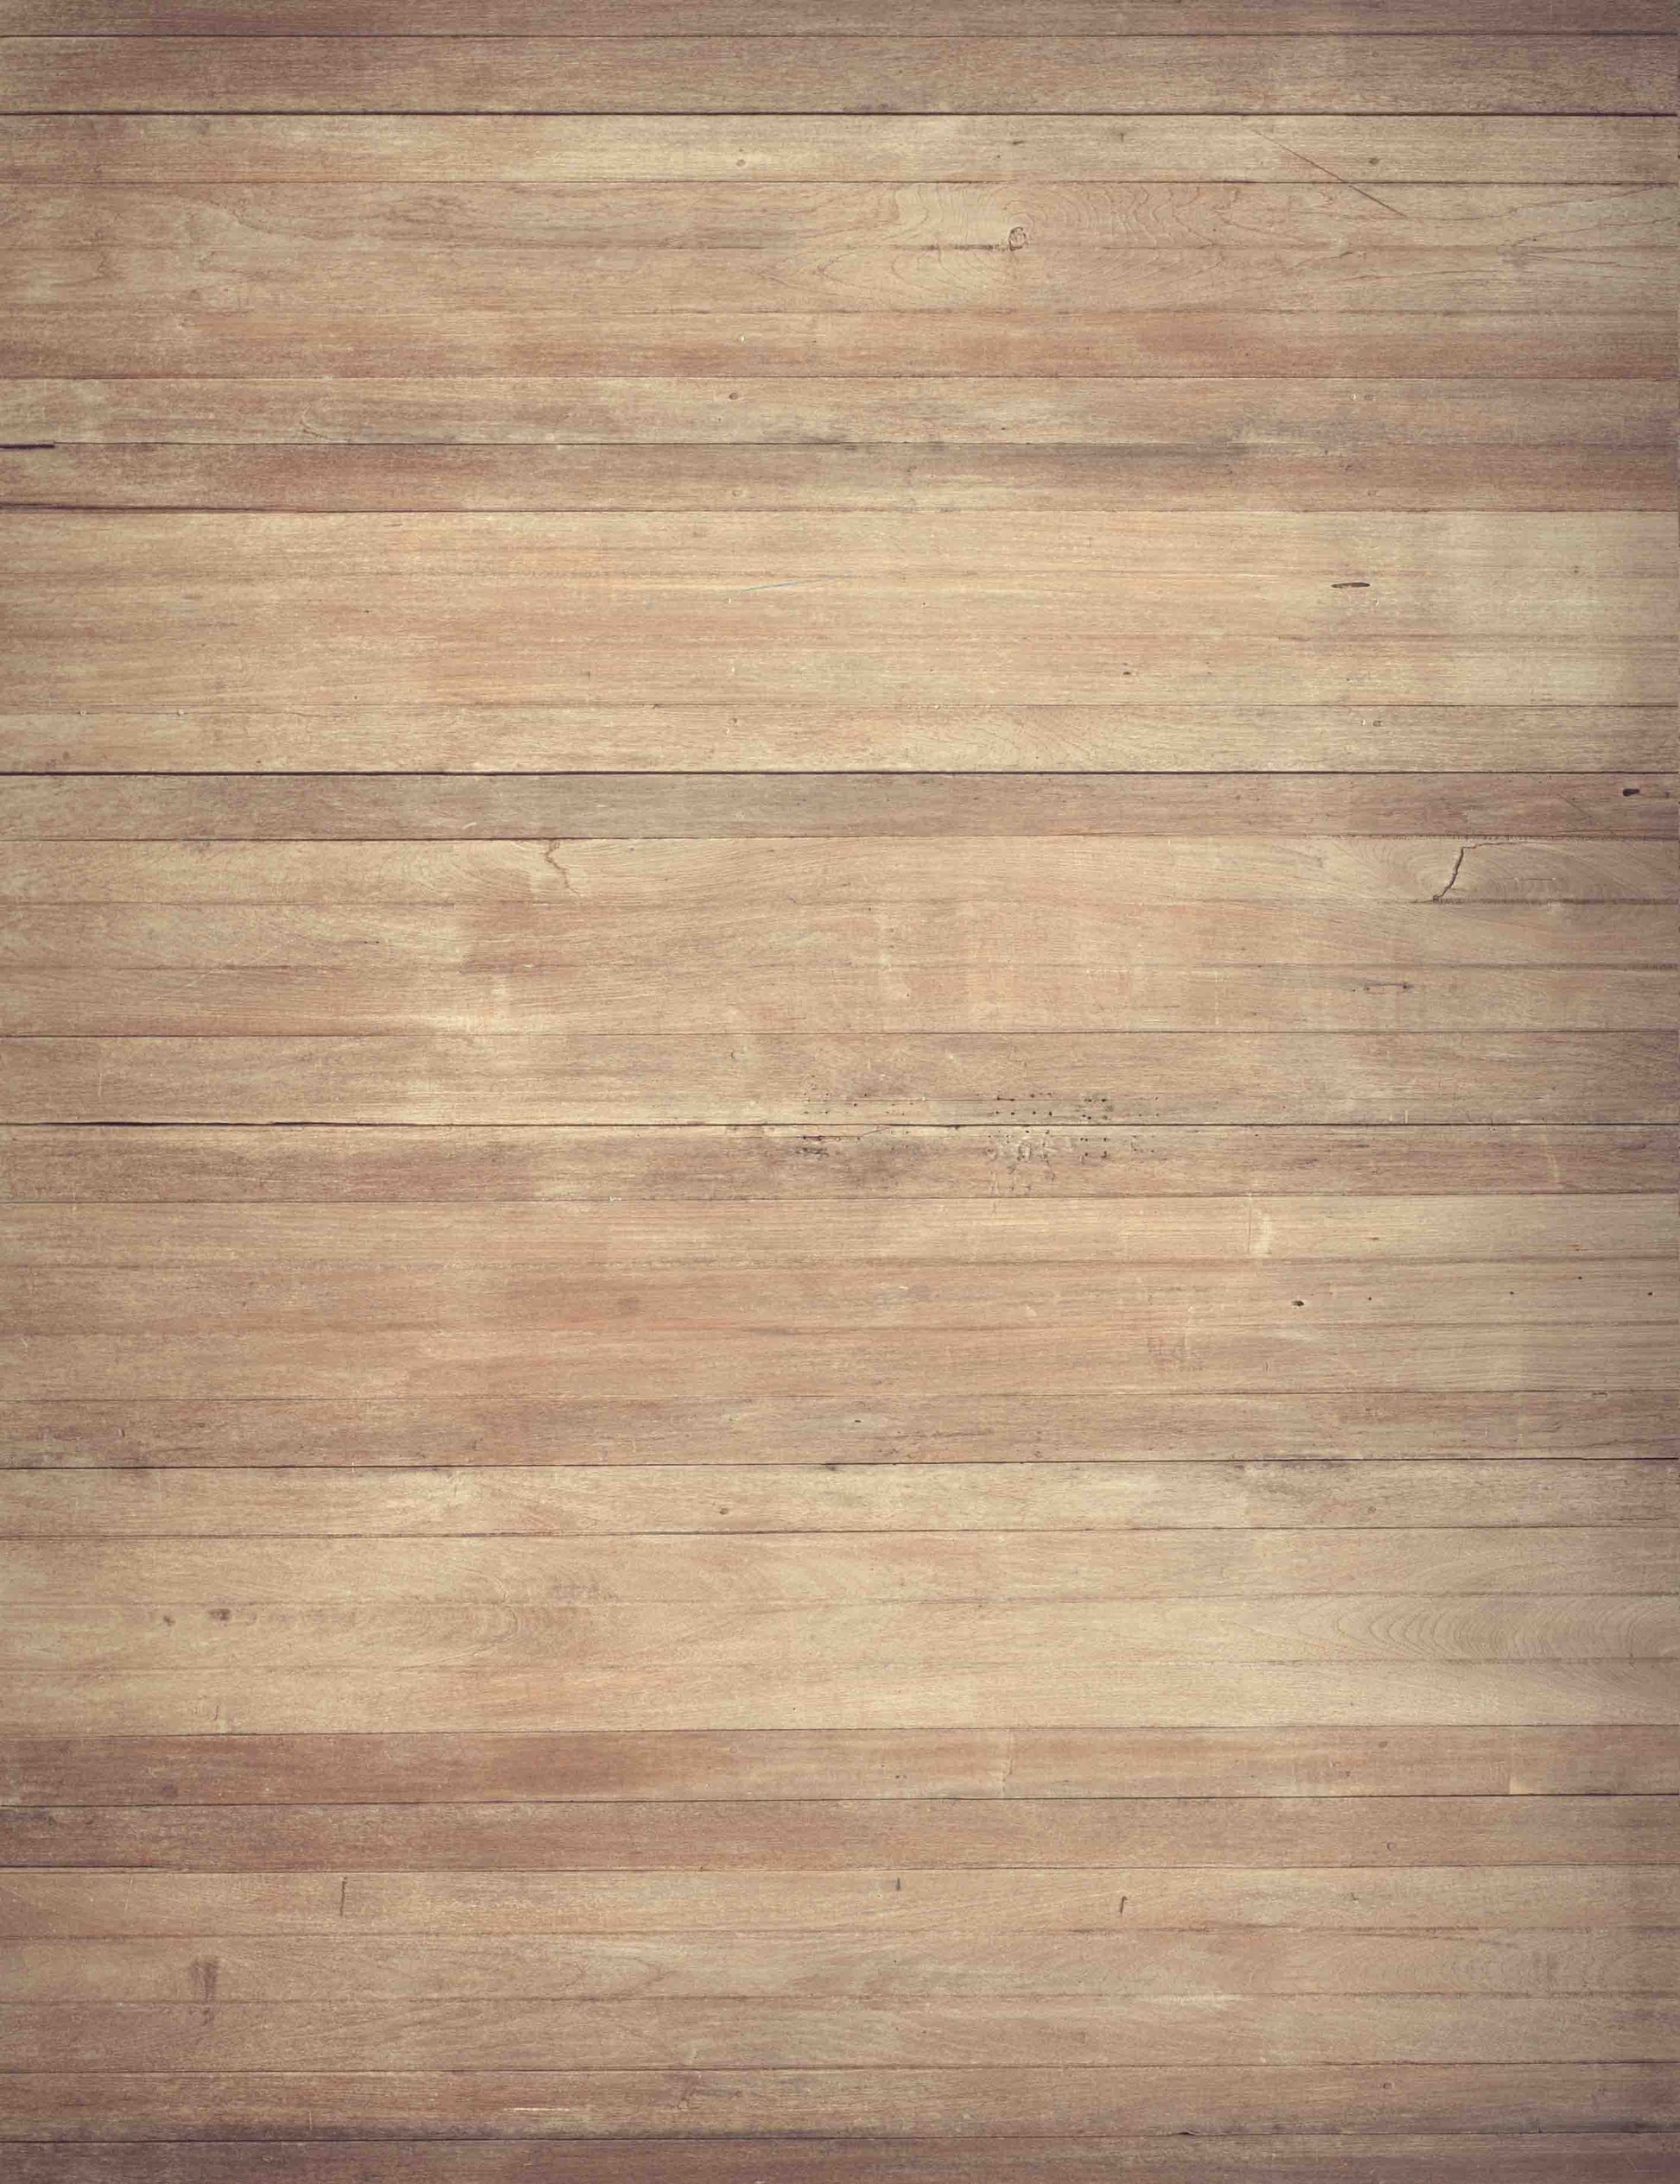 Light Brown Printed Wood Floor Mat Backdrop For Photography Shopbackdrop